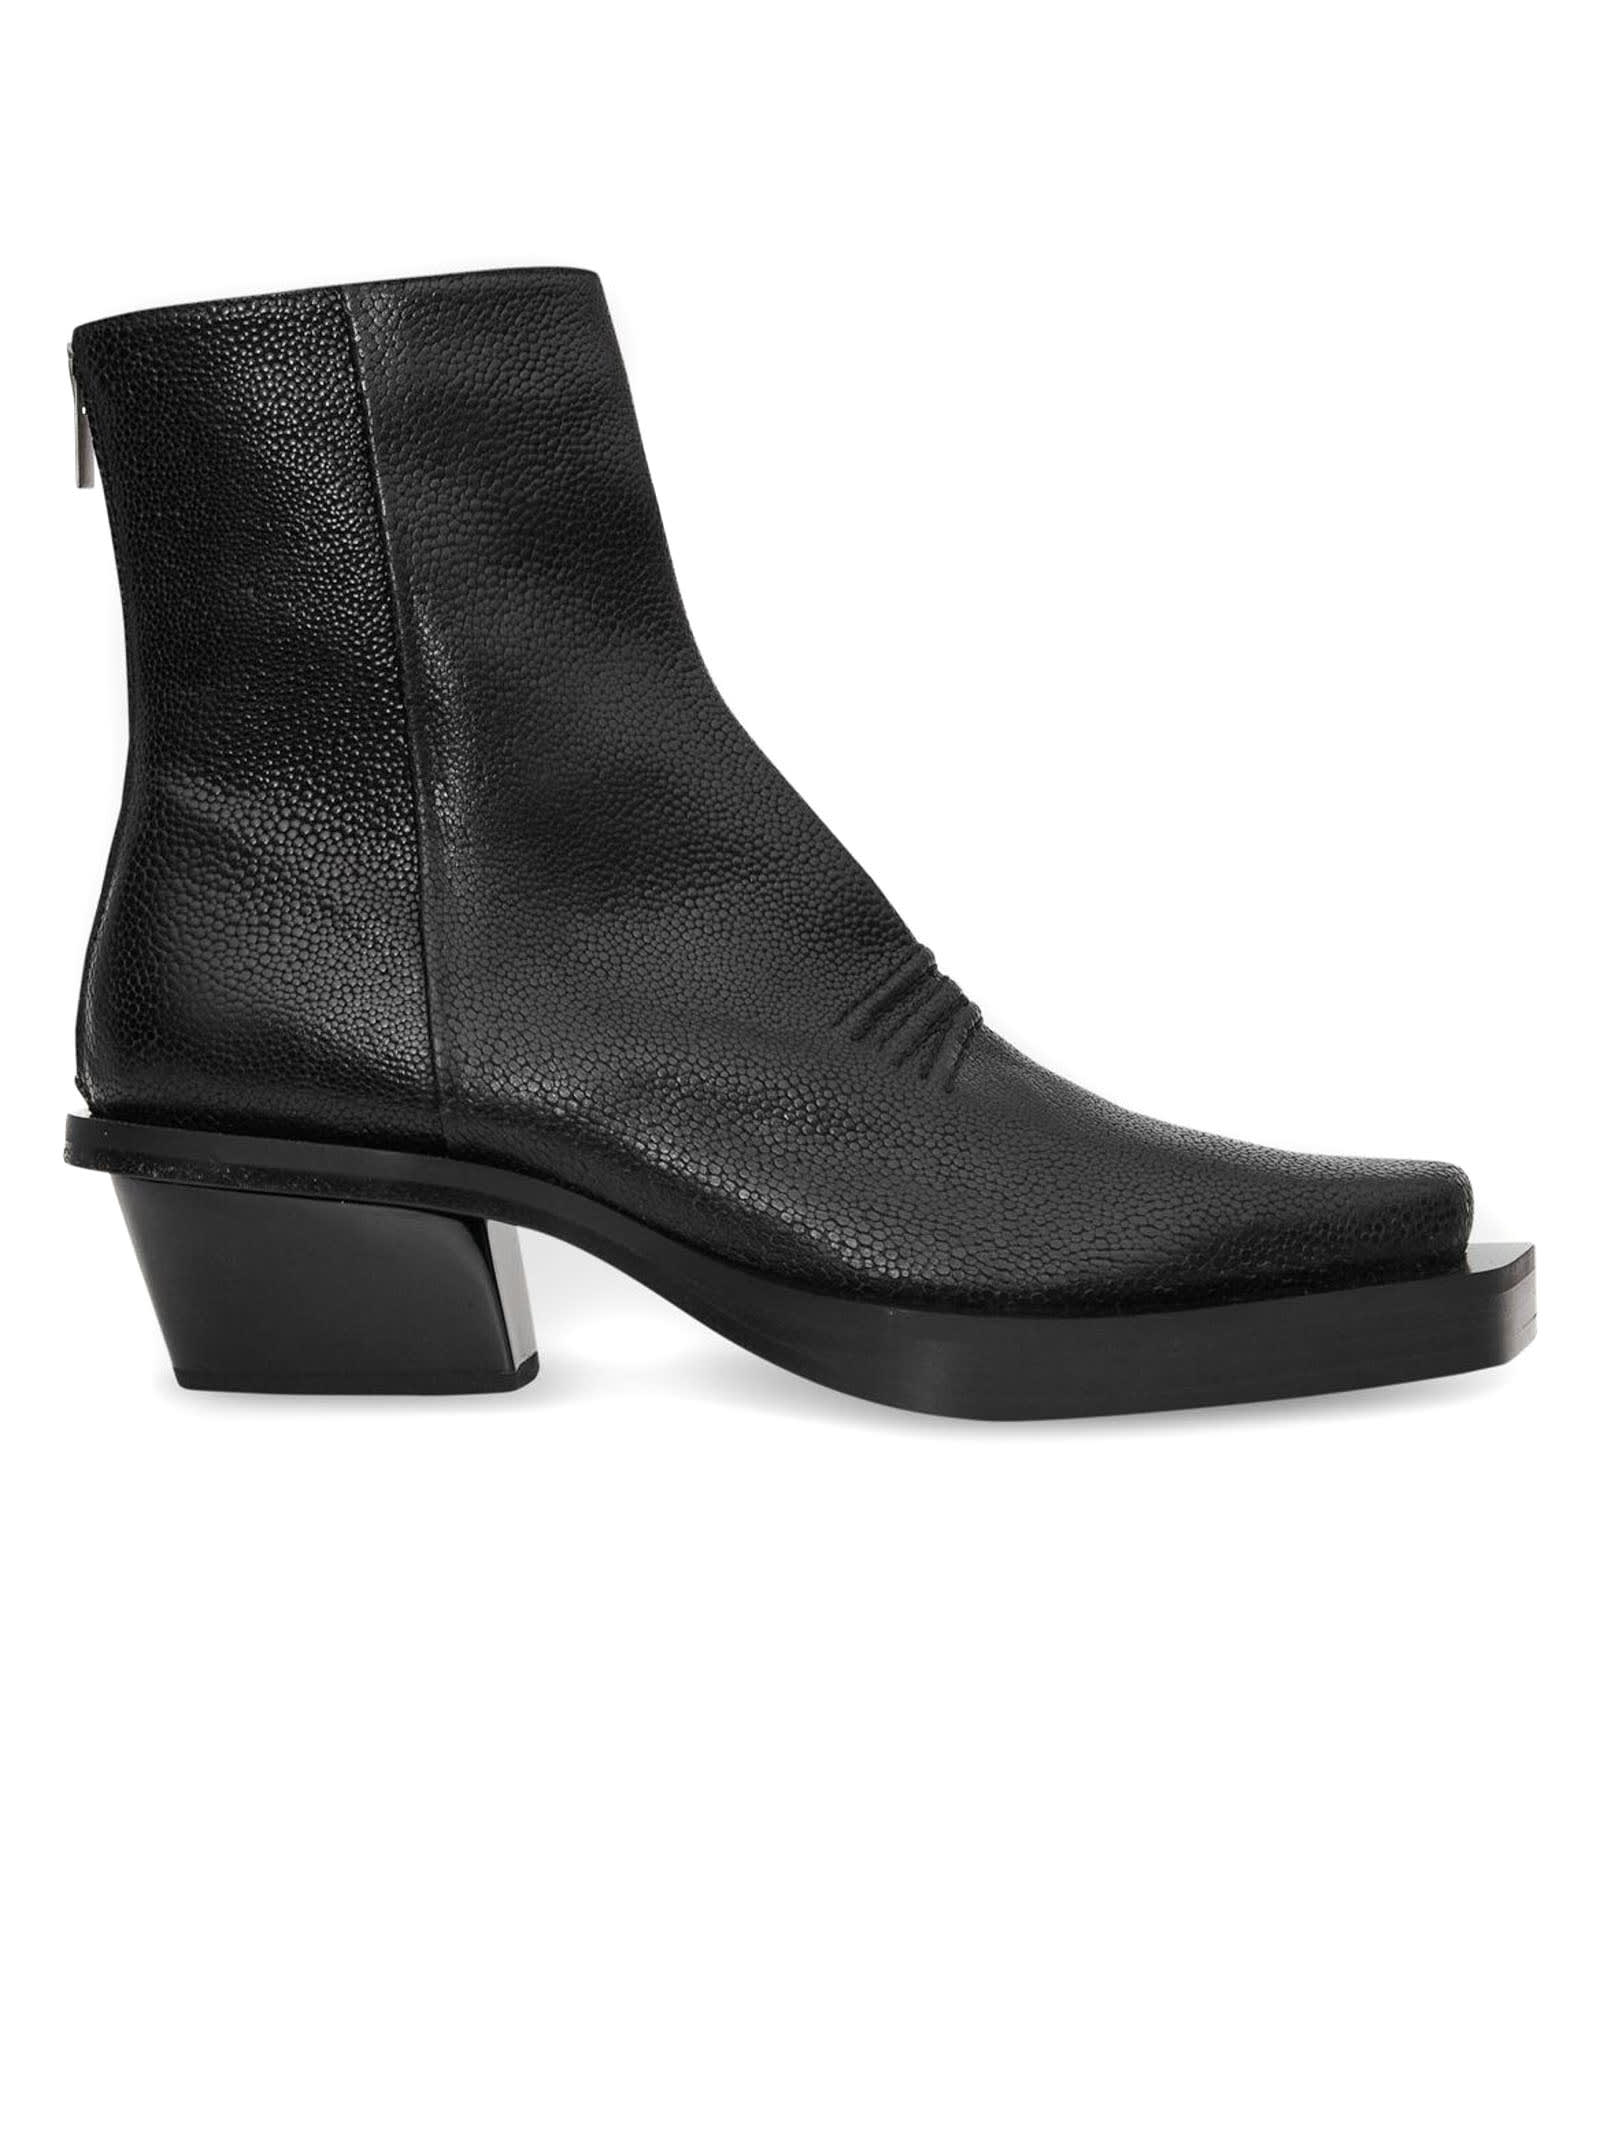 1017 ALYX 9SM Leone Ankle Boot In Black Leather